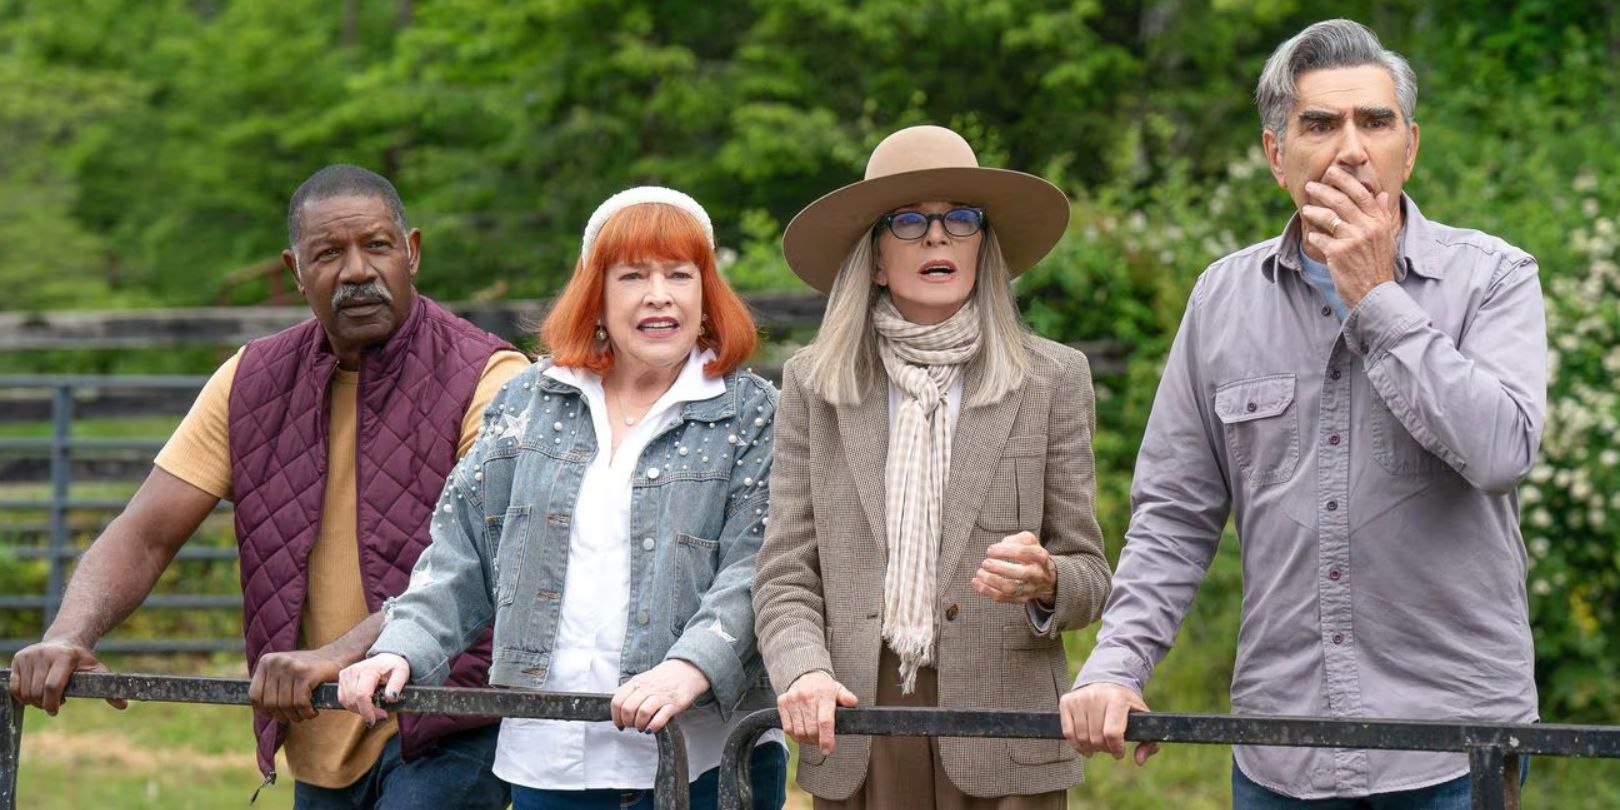 Summer Camp Review: Not Even Diane Keaton & Kathy Bates' Talents Can ...